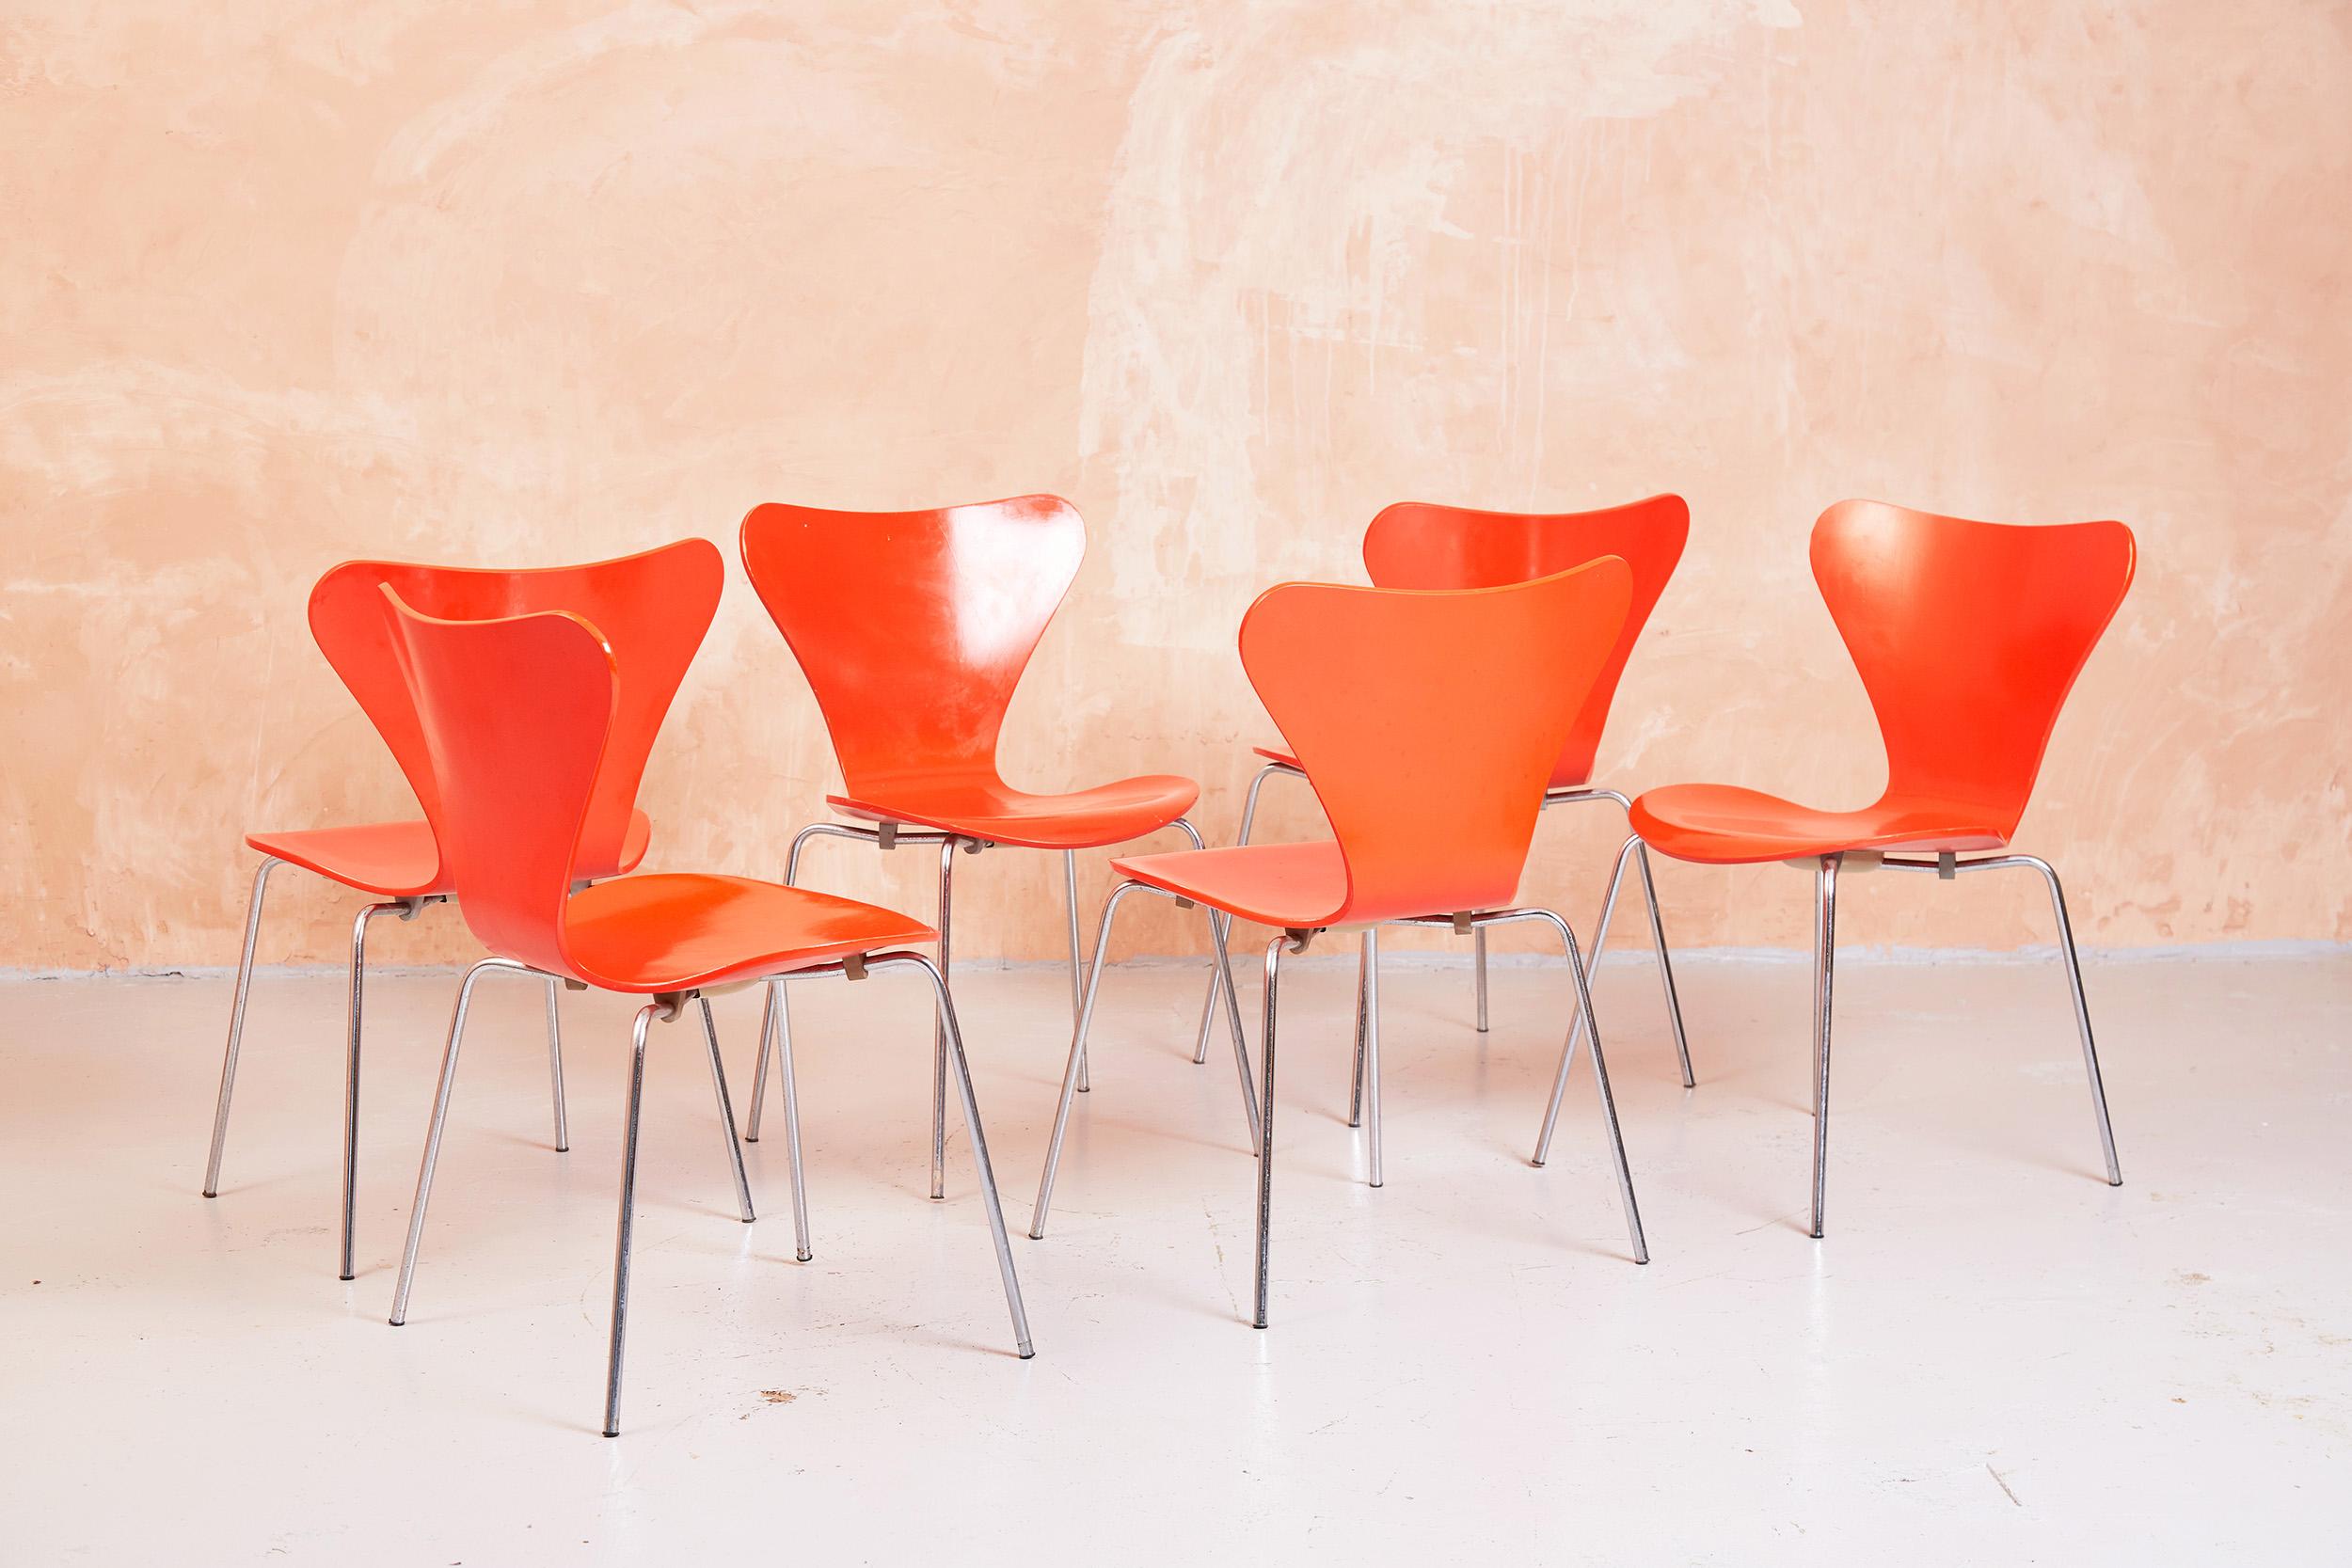 This set of 6 Model 3107, or Series Seven chairs, were designed by Arne Jacobsen and manufactured by Fritz Hansen.

The chairs are finished in the original orange paint.

The leg assembly plate on the underside of the chairs dates them as 1974,